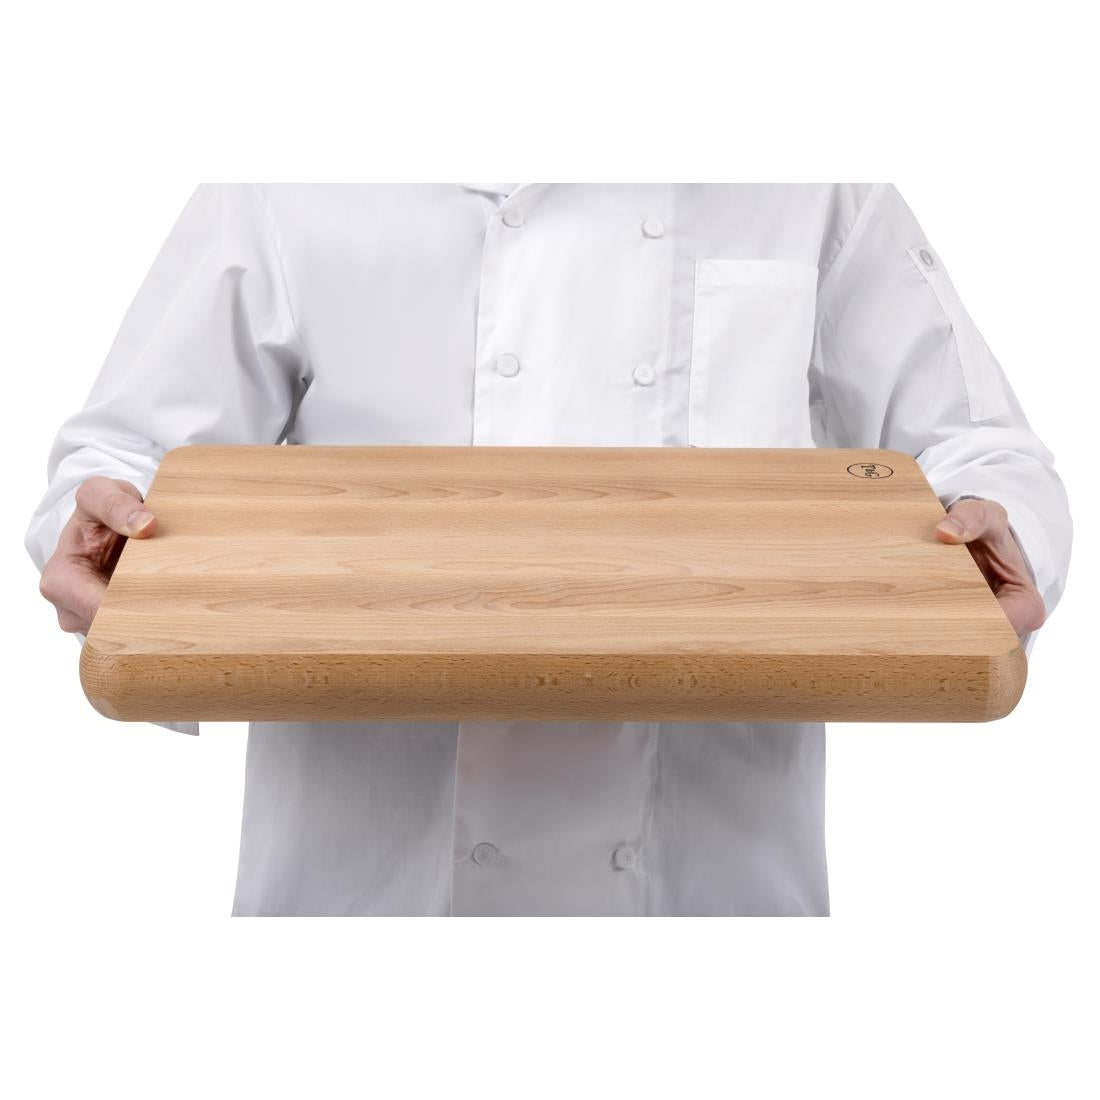 GJ514 T&G Beech Wood Chopping Board Large JD Catering Equipment Solutions Ltd